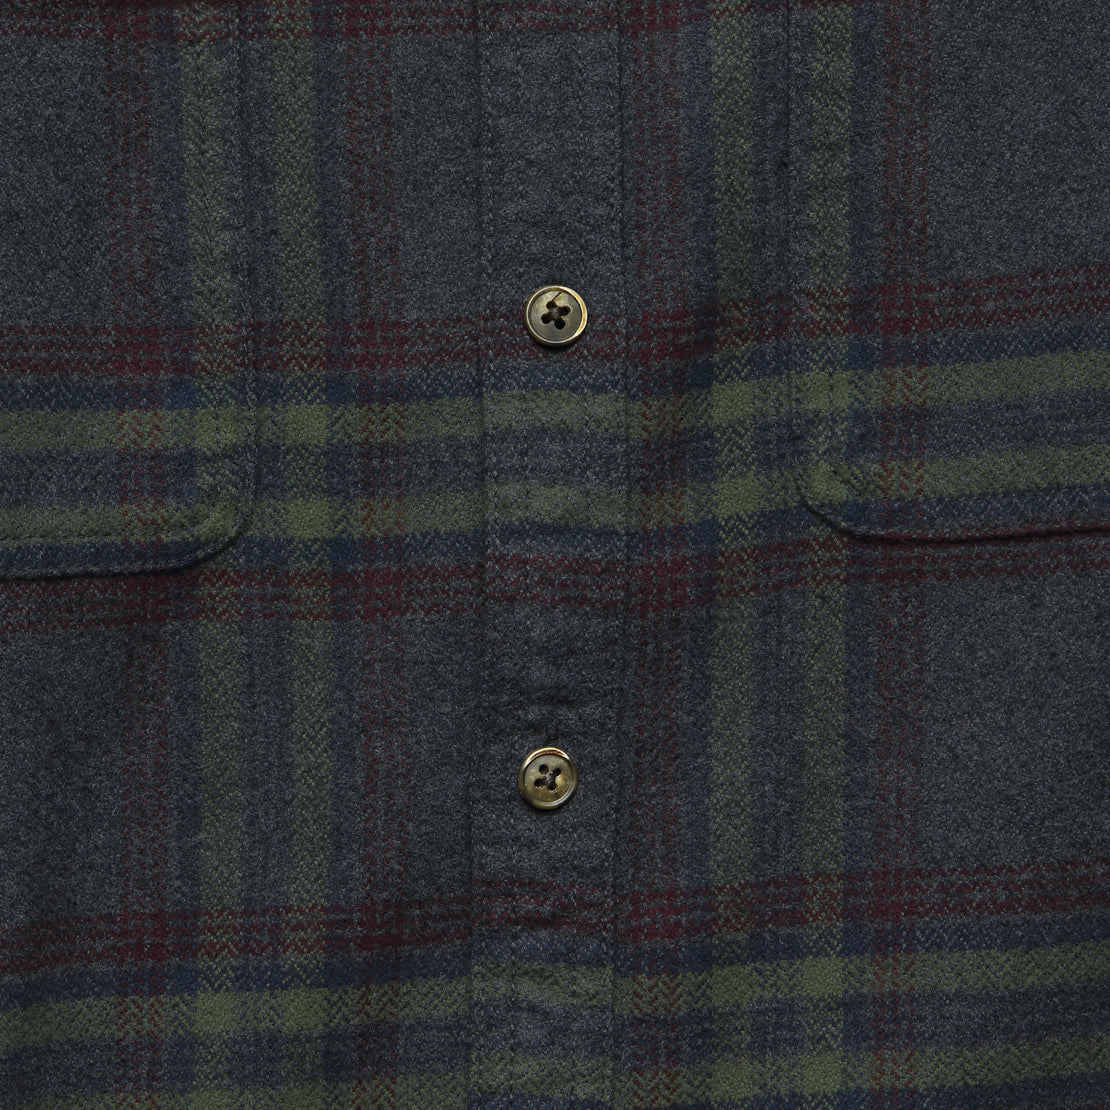 Crysade Plaid Shirt - Heather Charcoal - Life After Denim - STAG Provisions - Tops - L/S Woven - Plaid